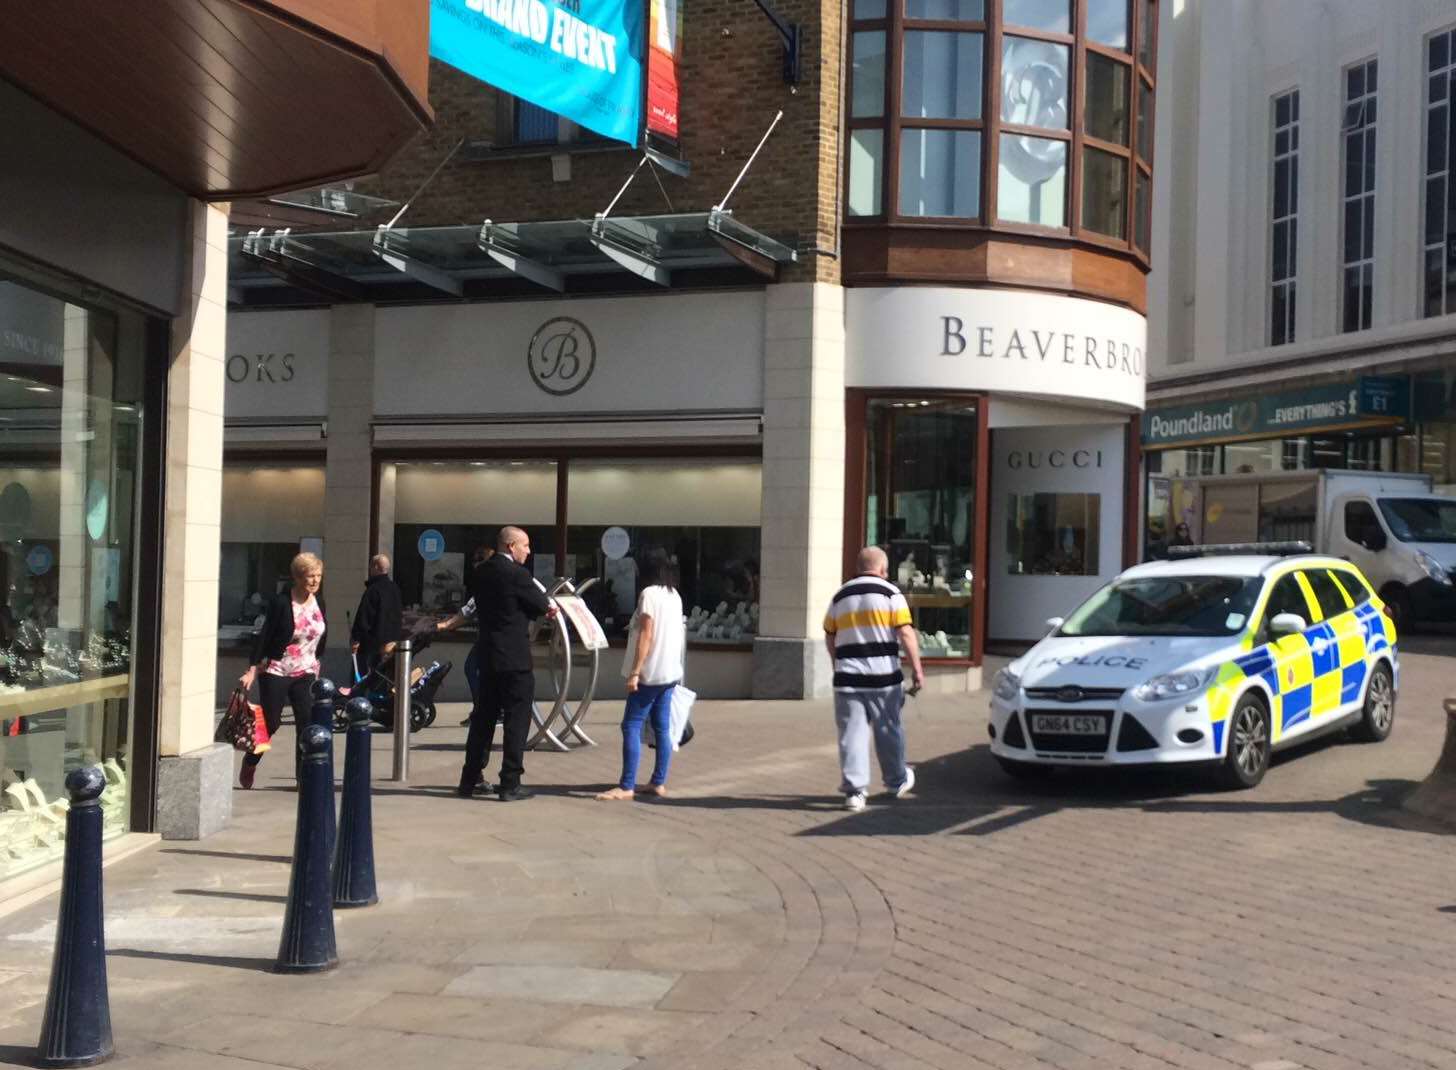 Police at the entrance of Fremlin Walk, which has a number of jewellery shops